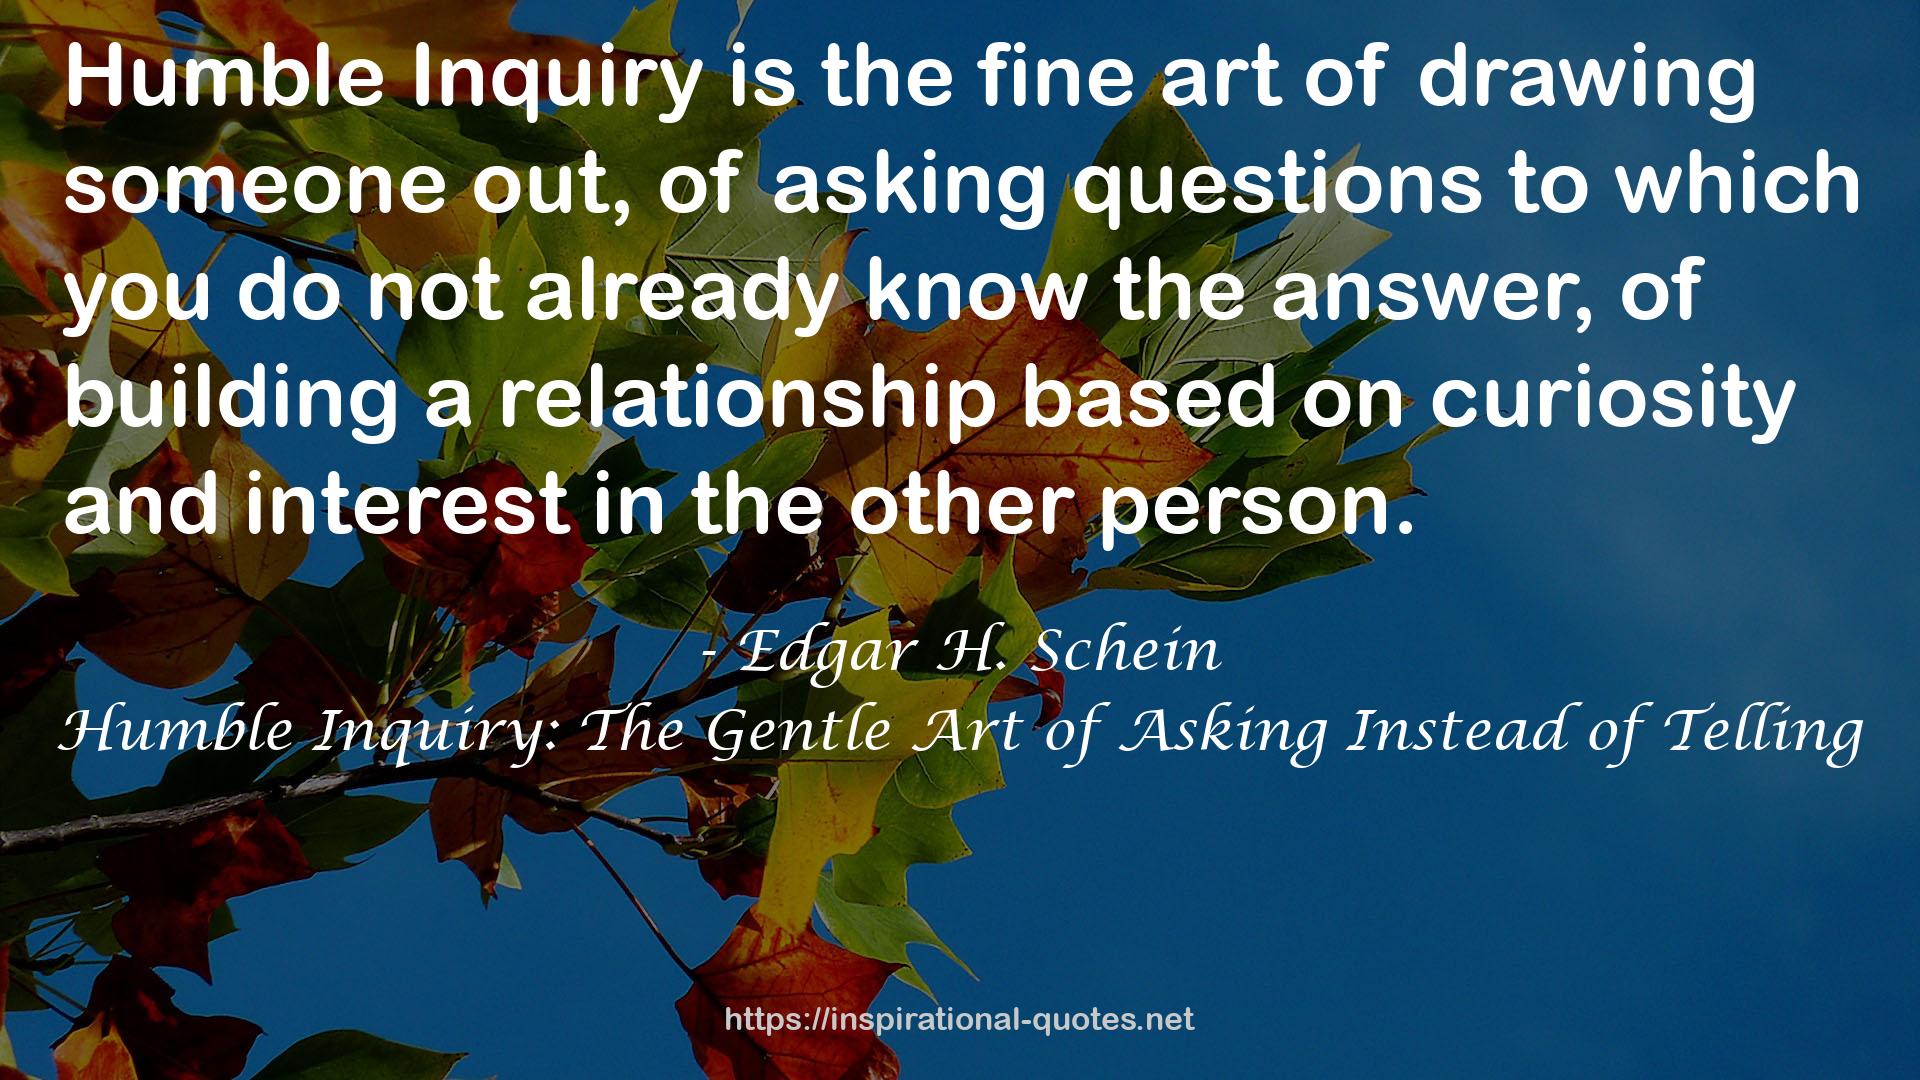 Humble Inquiry: The Gentle Art of Asking Instead of Telling QUOTES